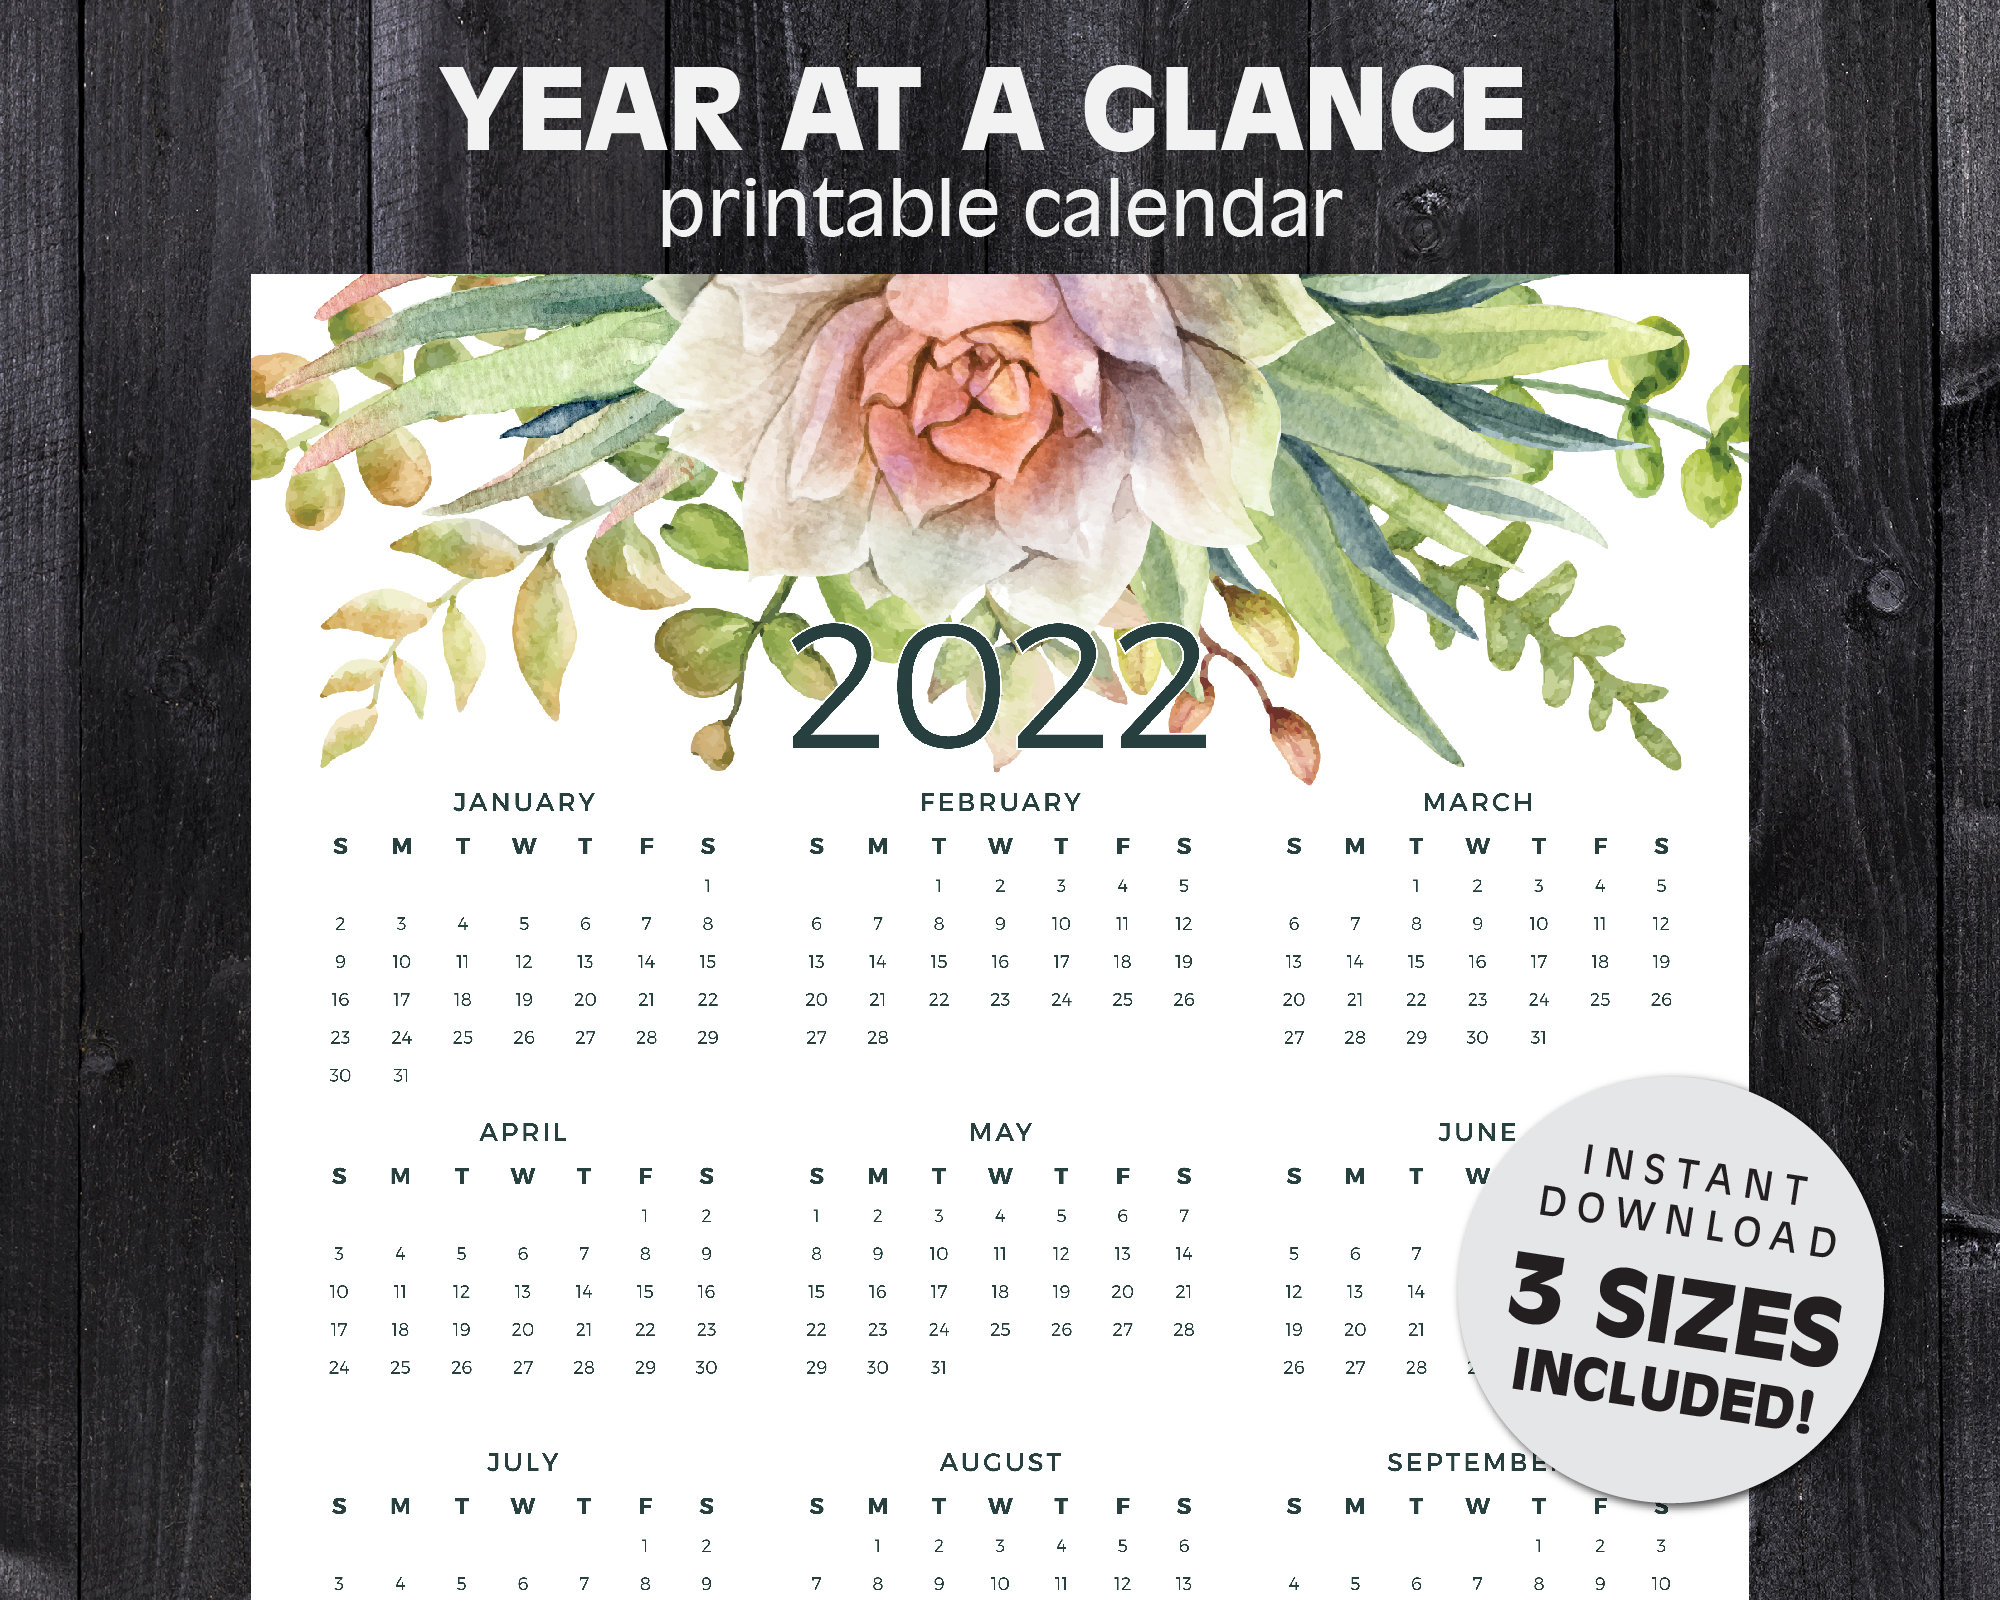 2022 Yearly Calendar At A Glance Succulents &amp; Cactus | Etsy throughout 2022 Year At A Glance